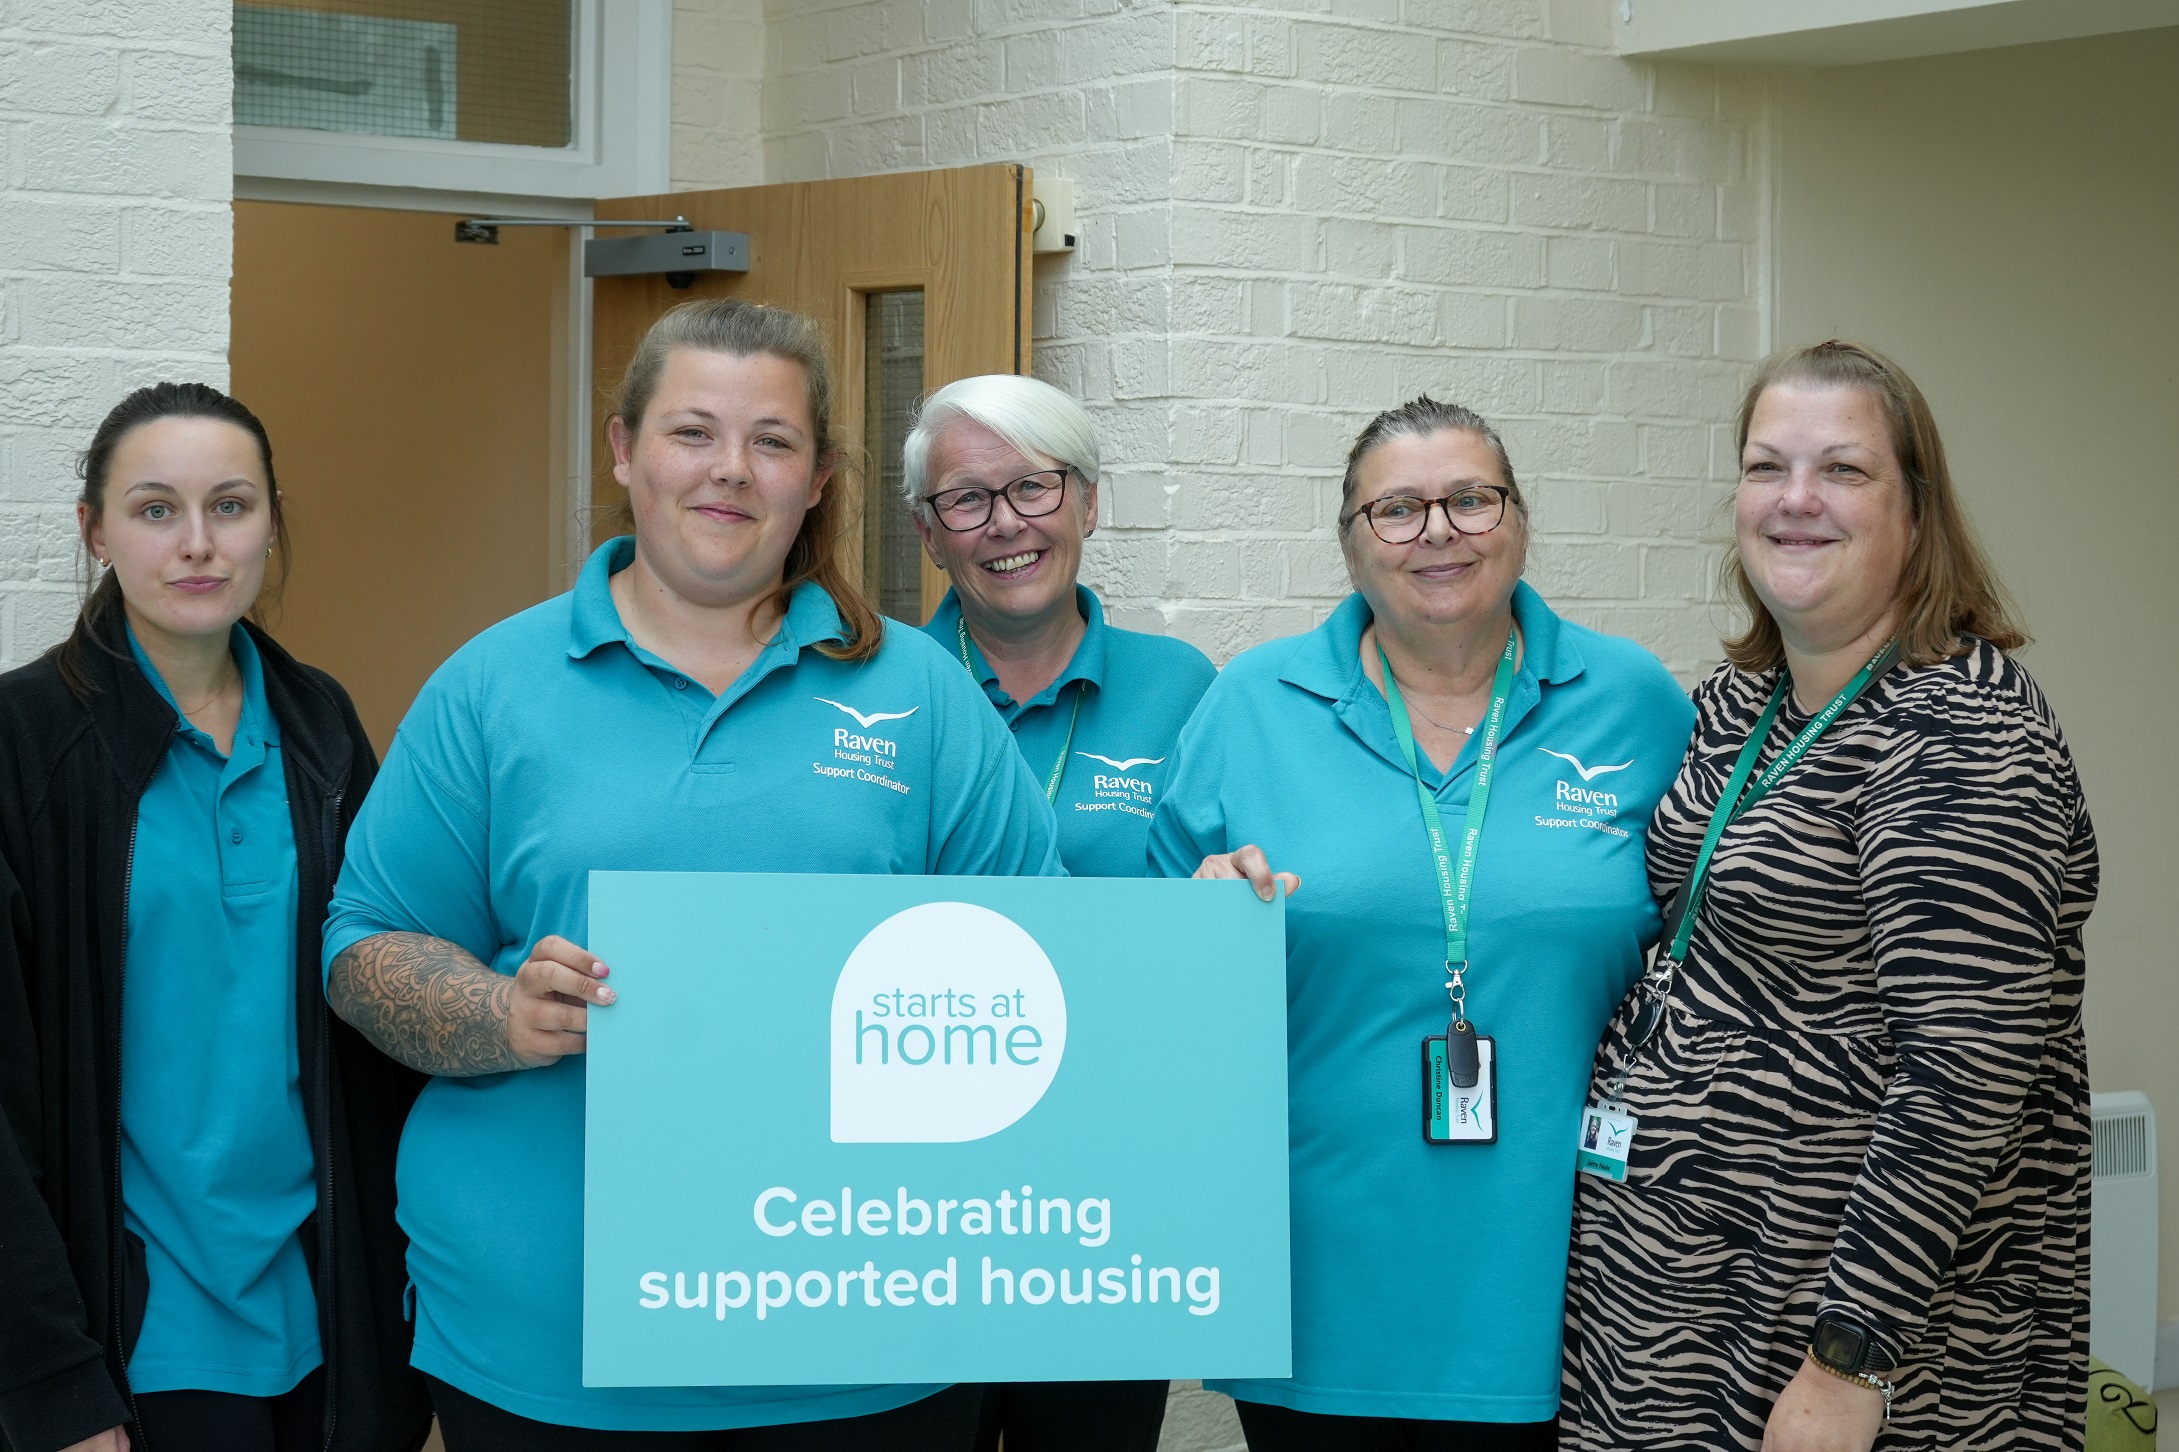 Raven support co-ordinators with Starts at Home sign